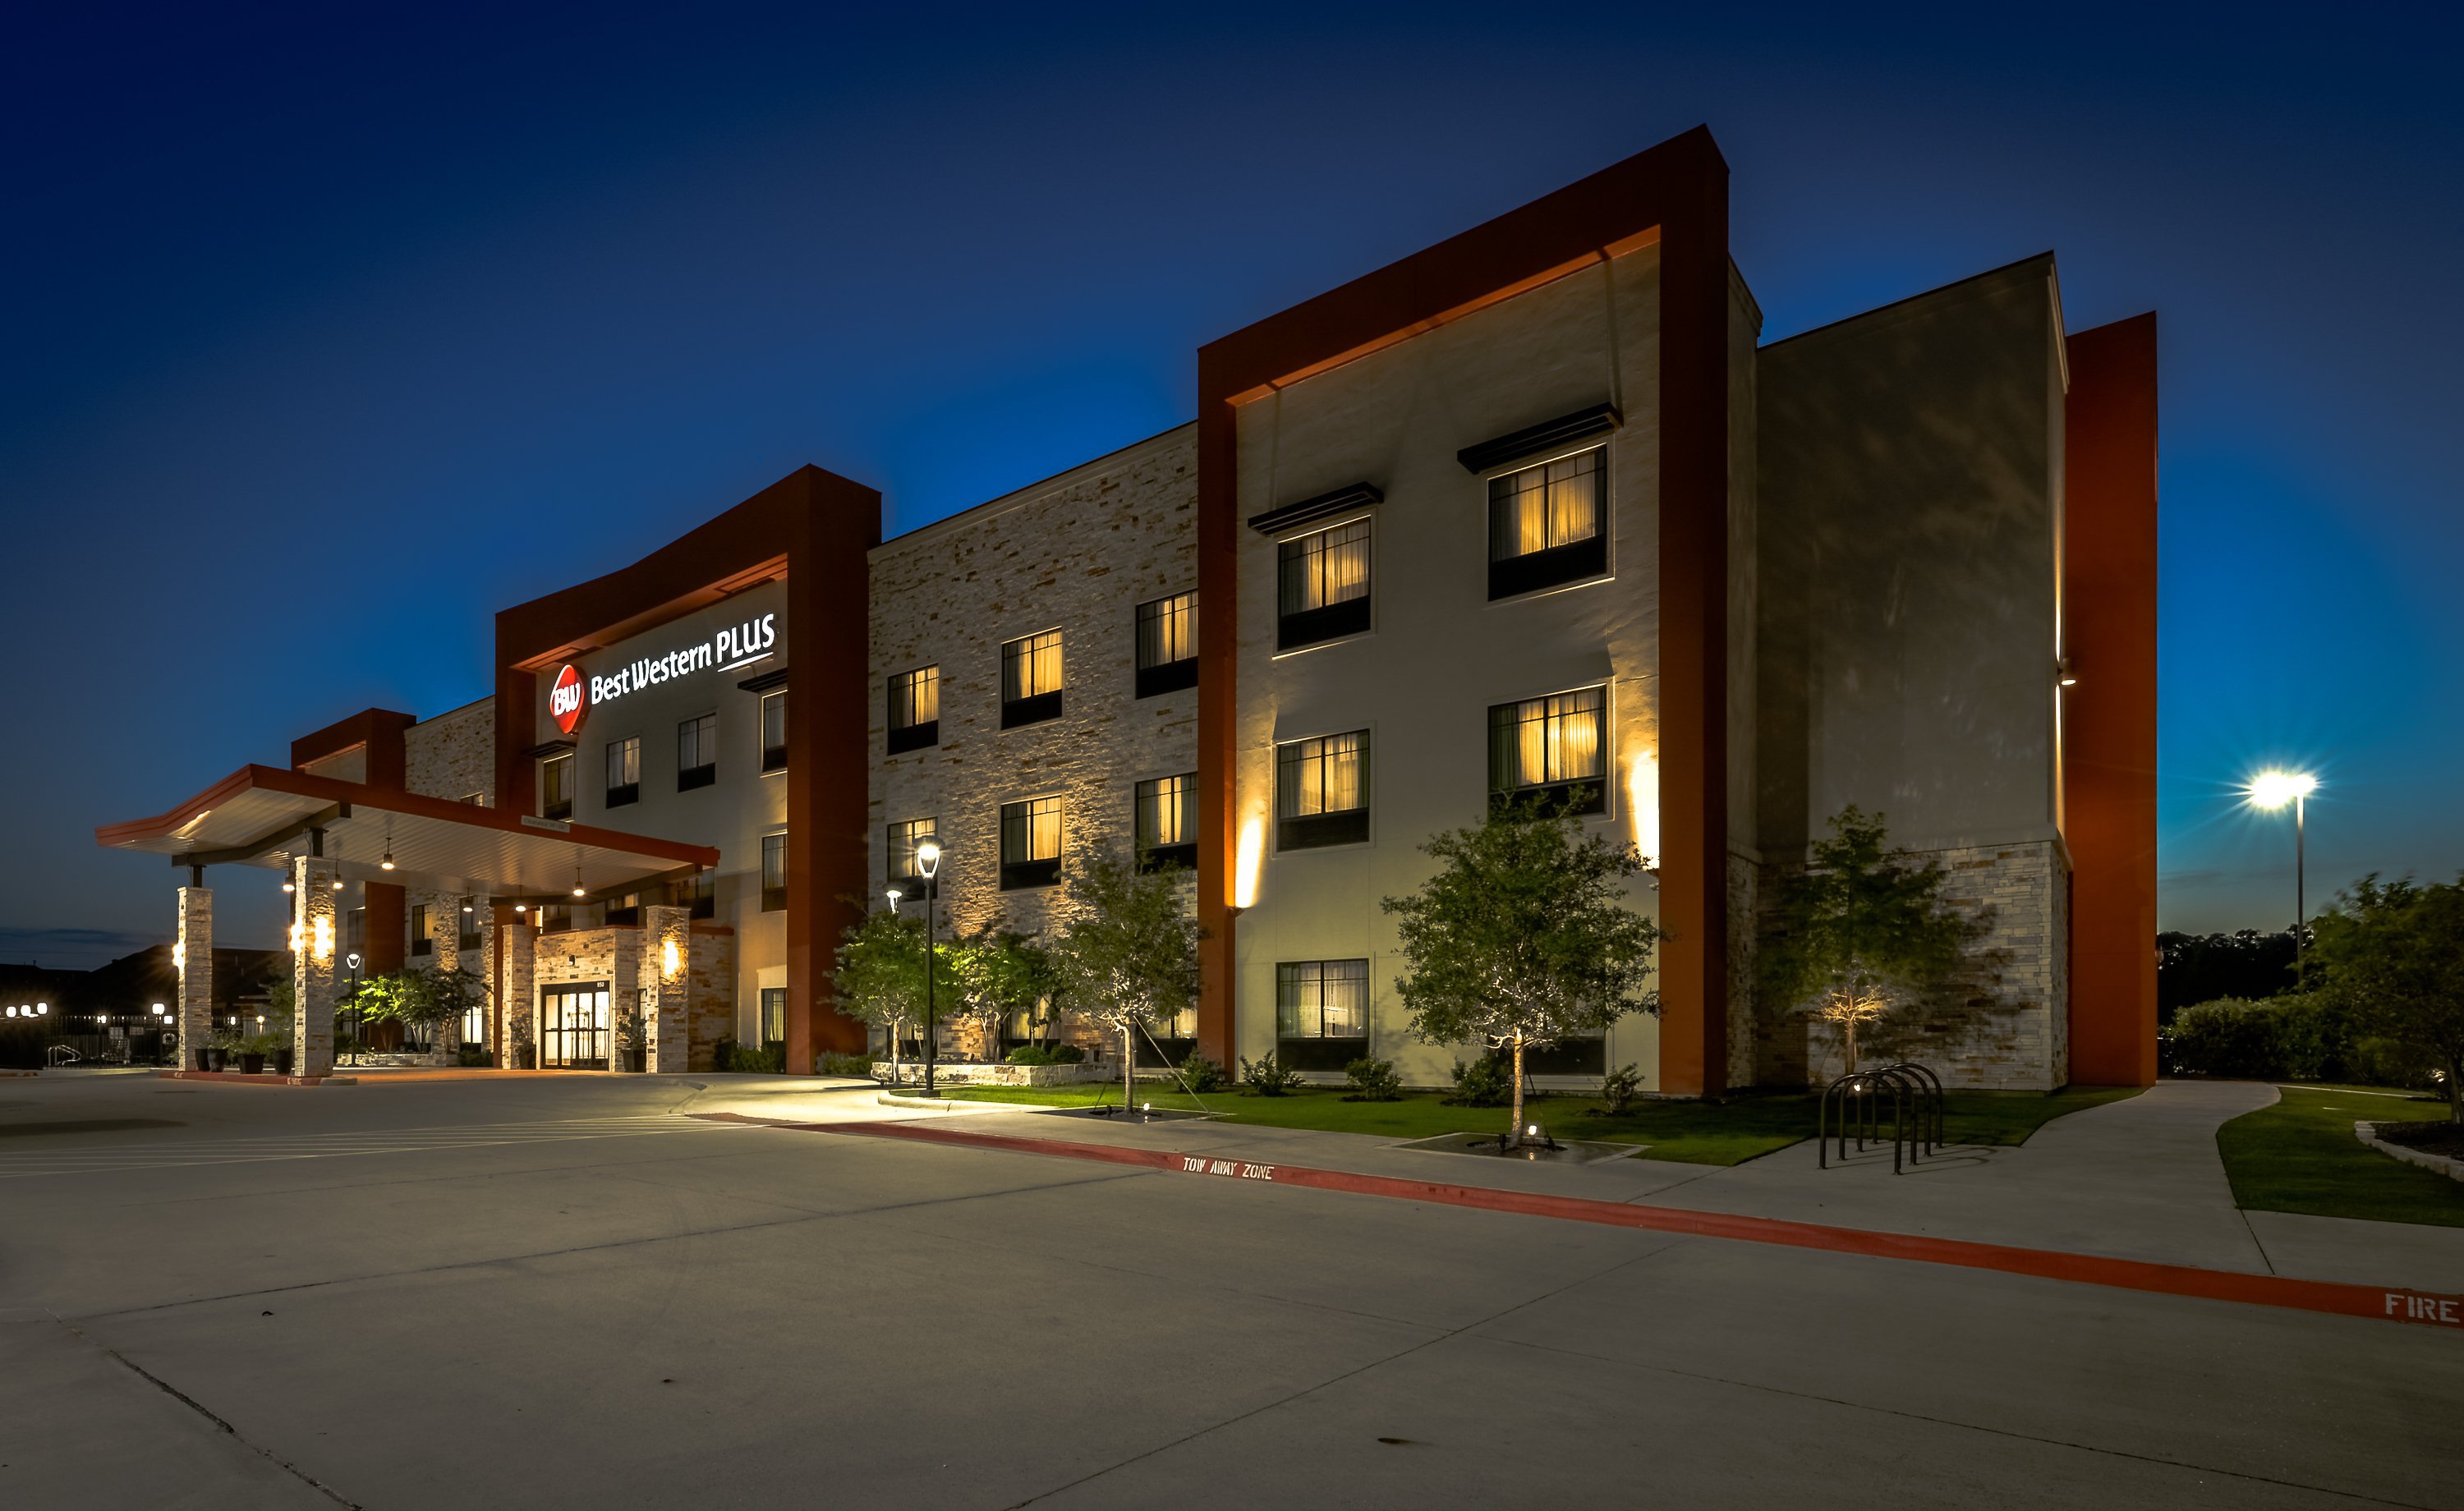 Photo of Best Western Plus College Station Inn & Suites, College Station, TX